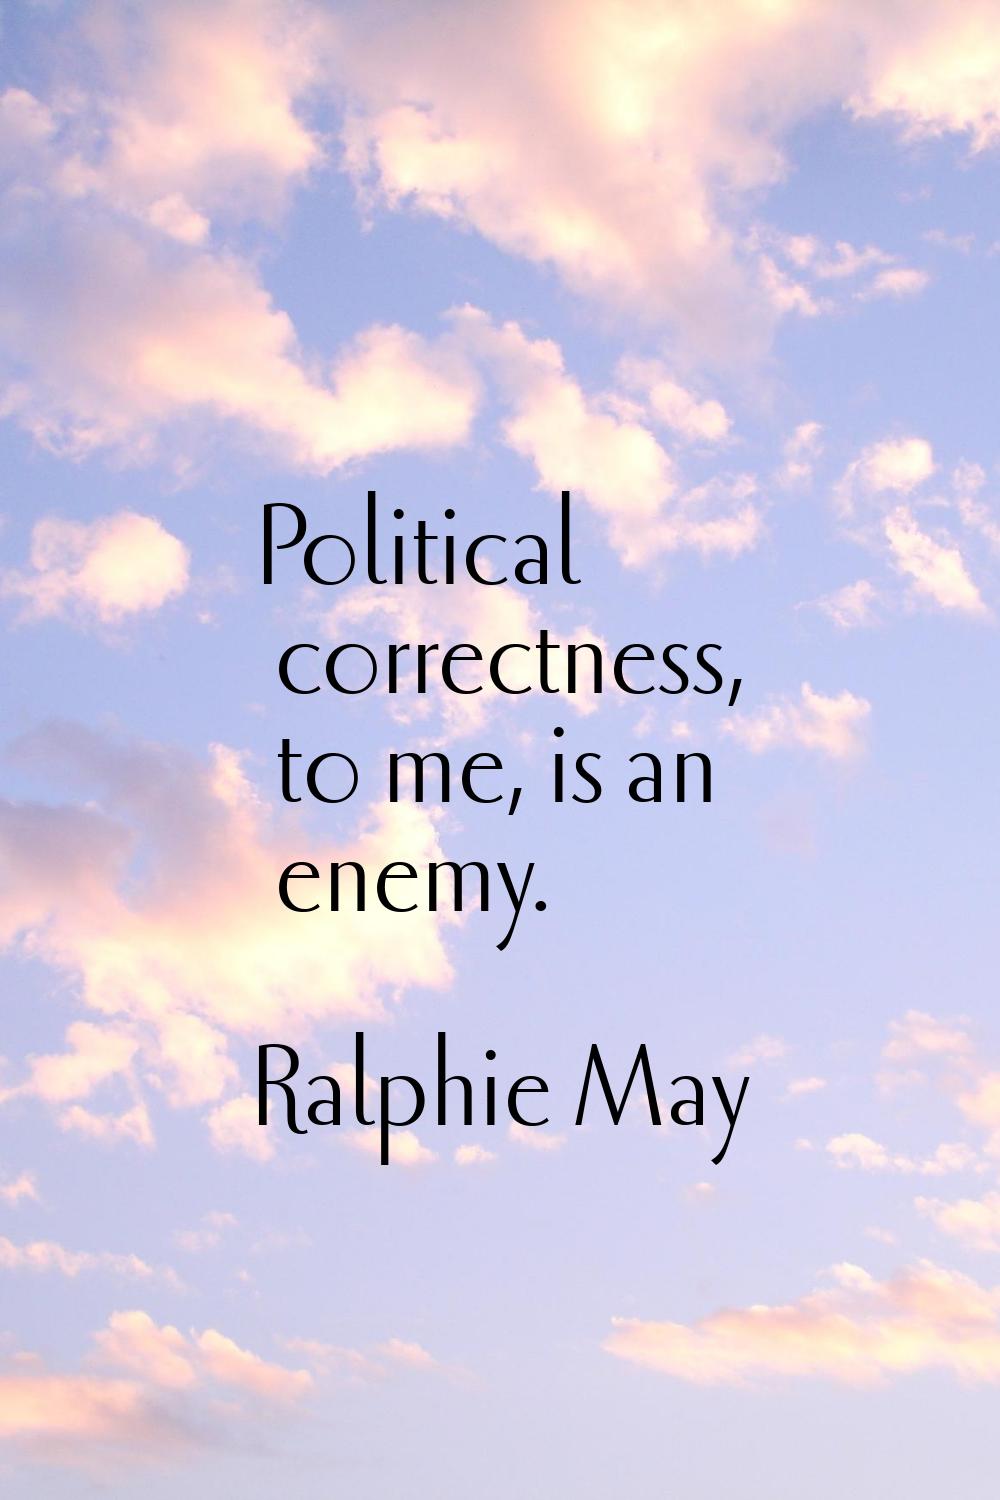 Political correctness, to me, is an enemy.